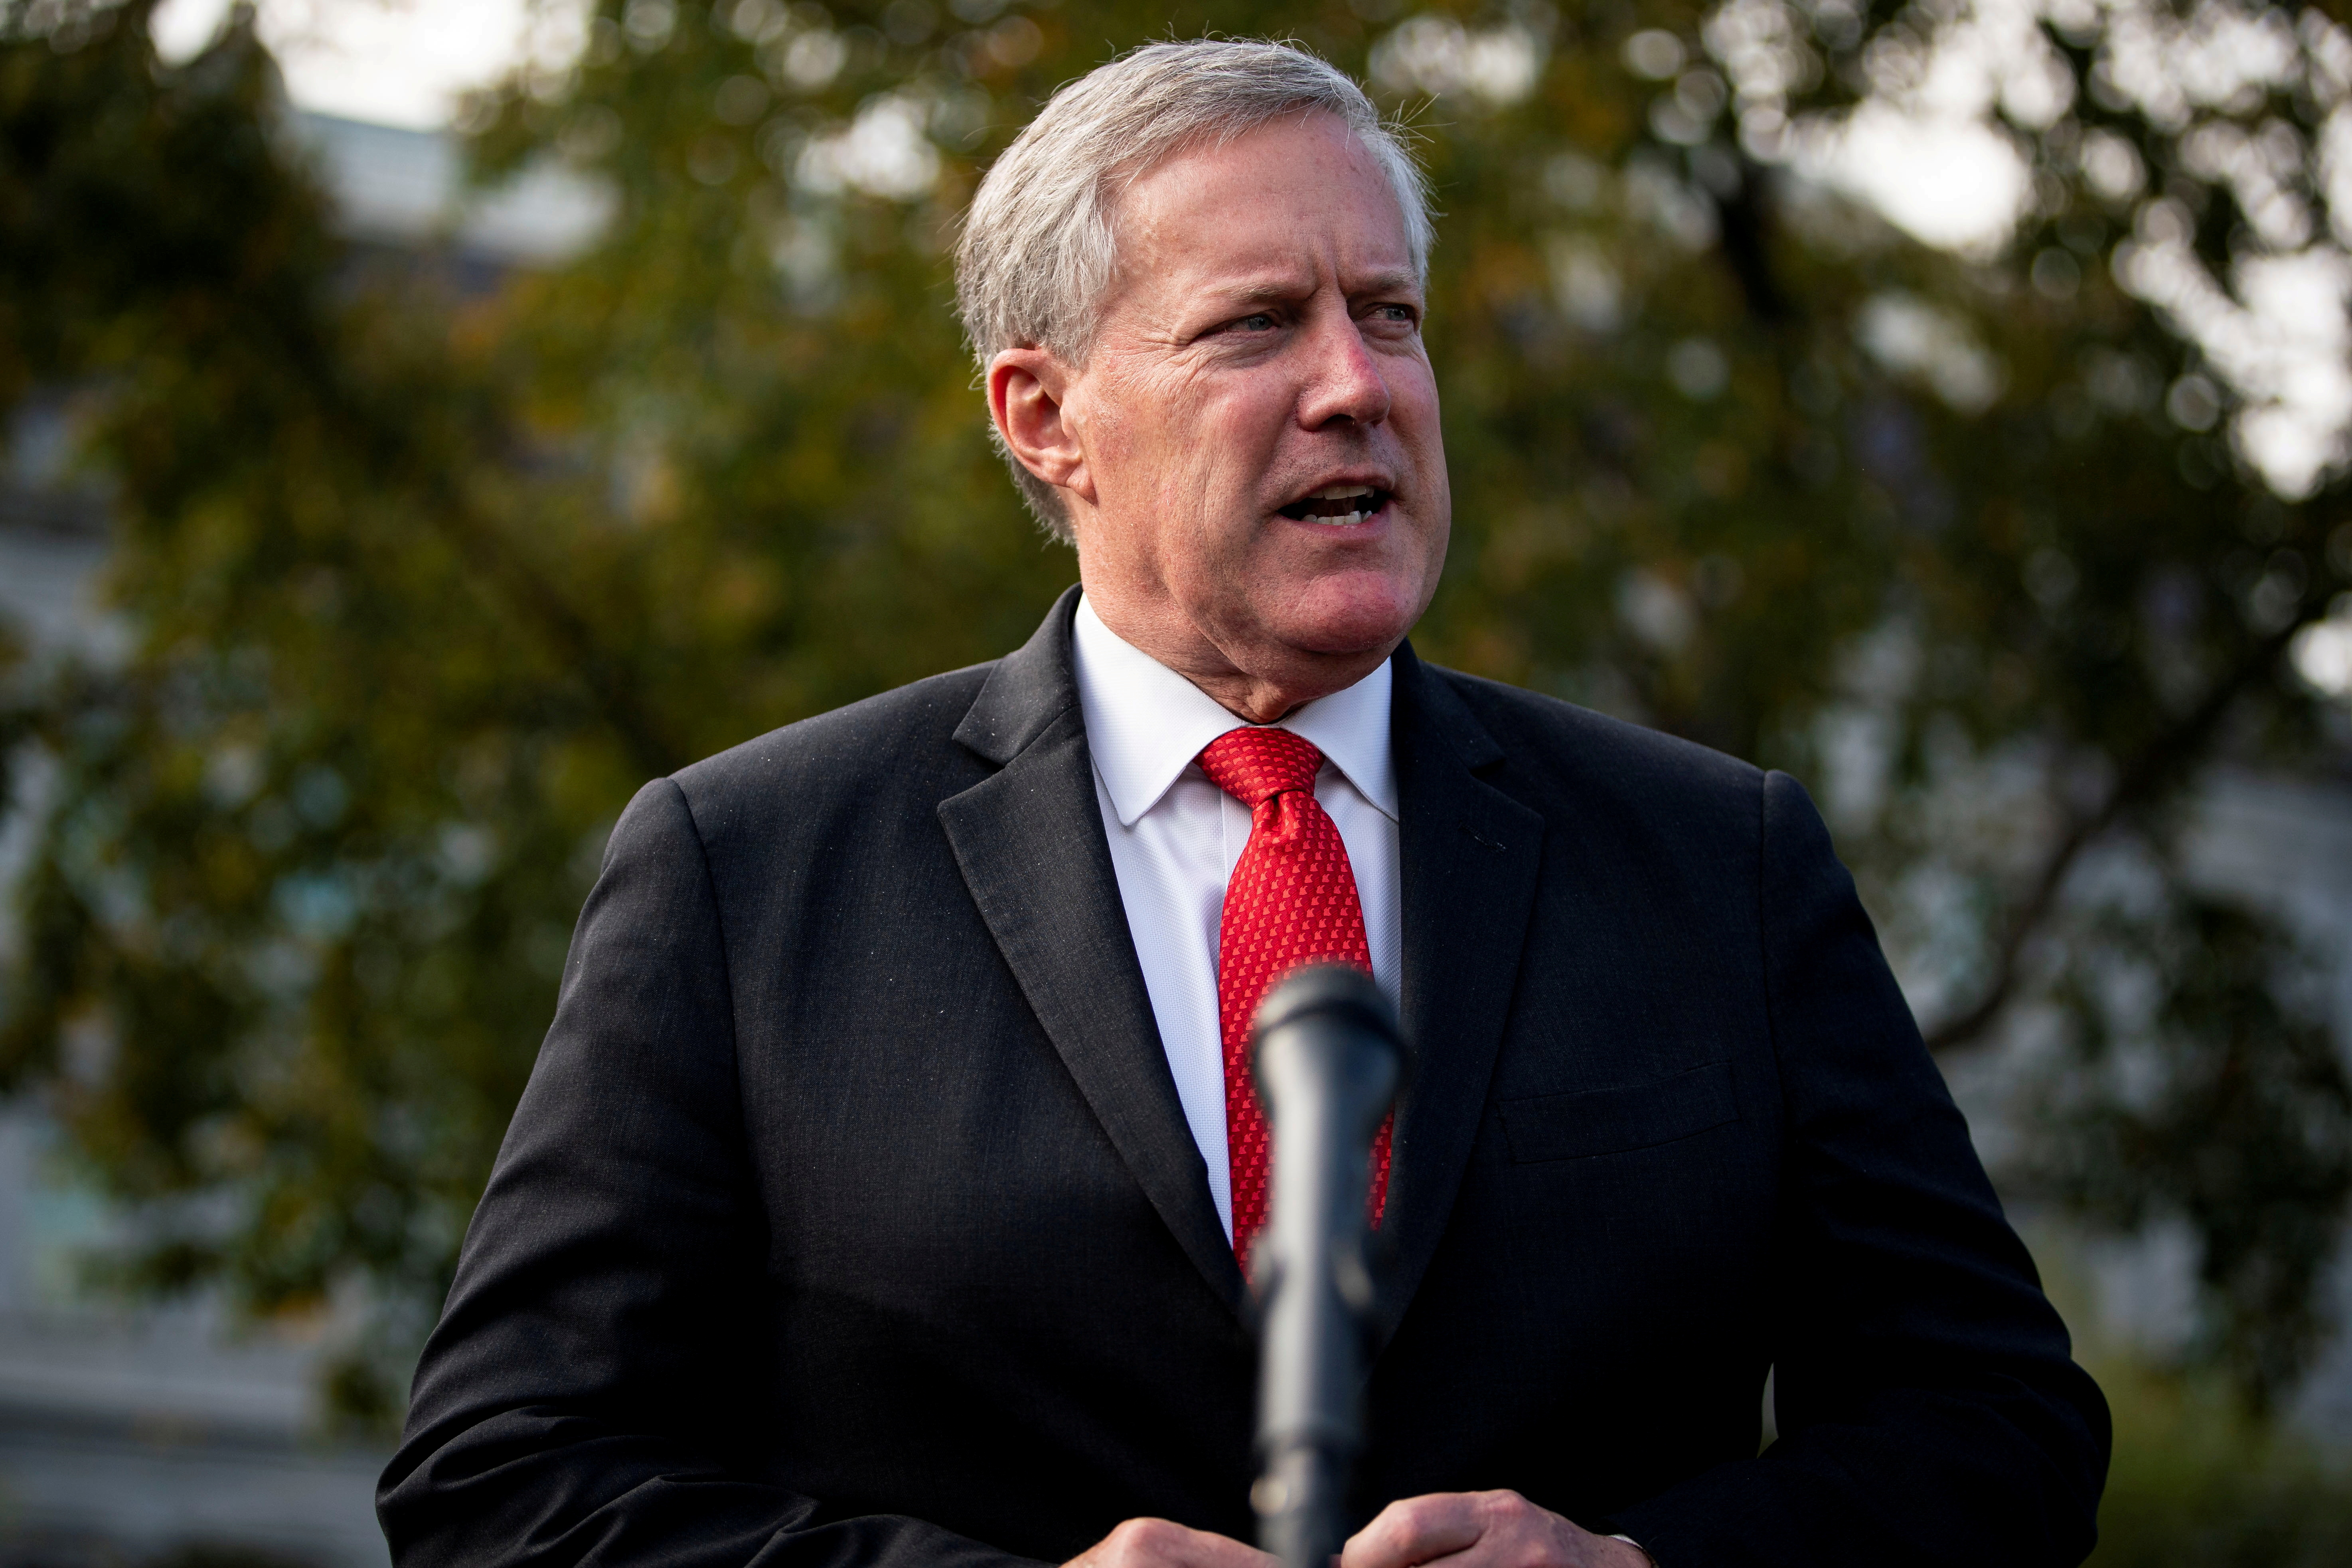 White House Chief of Staff Mark Meadows speaks to reporters following a television interview, outside the White House in Washington, U.S. October 21, 2020. REUTERS/Al Drago/File Photo